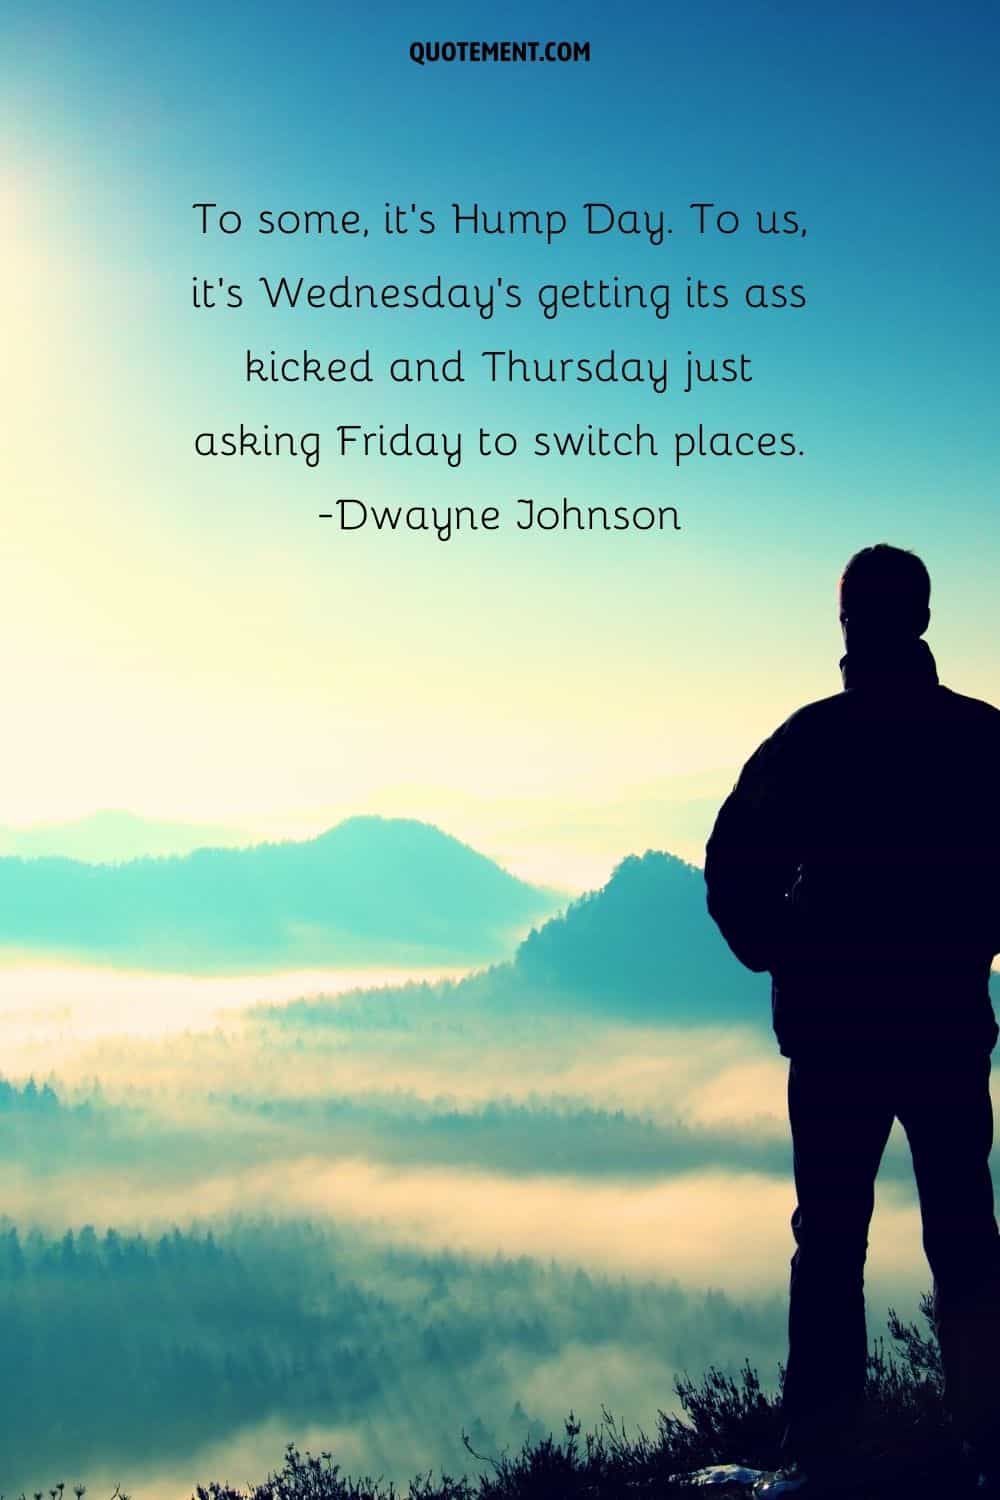 a man standing on a mountaintop representing Wednesday vibes quote about Wednesday hump day